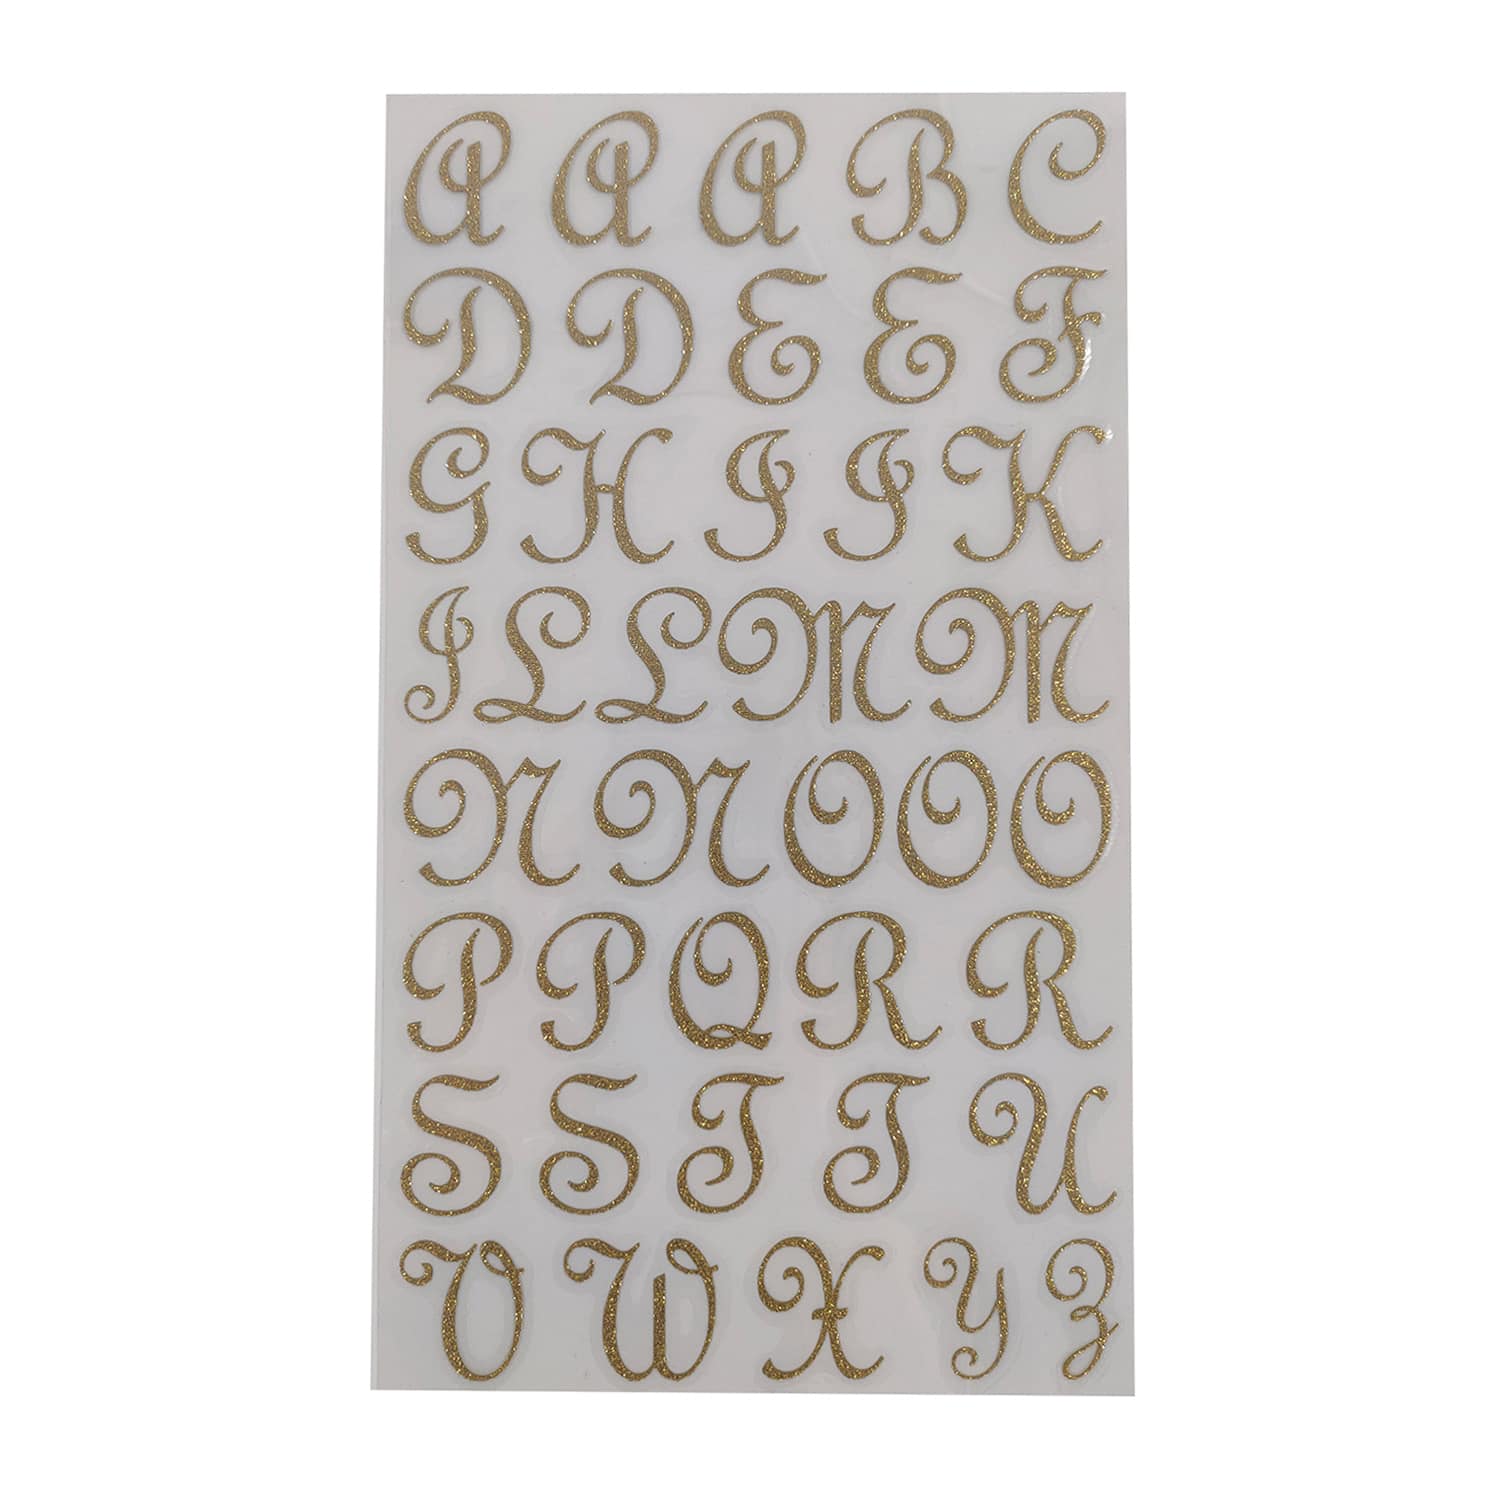 1.5 Iron-On Glitter Cooper Letters by Make Market®, Michaels